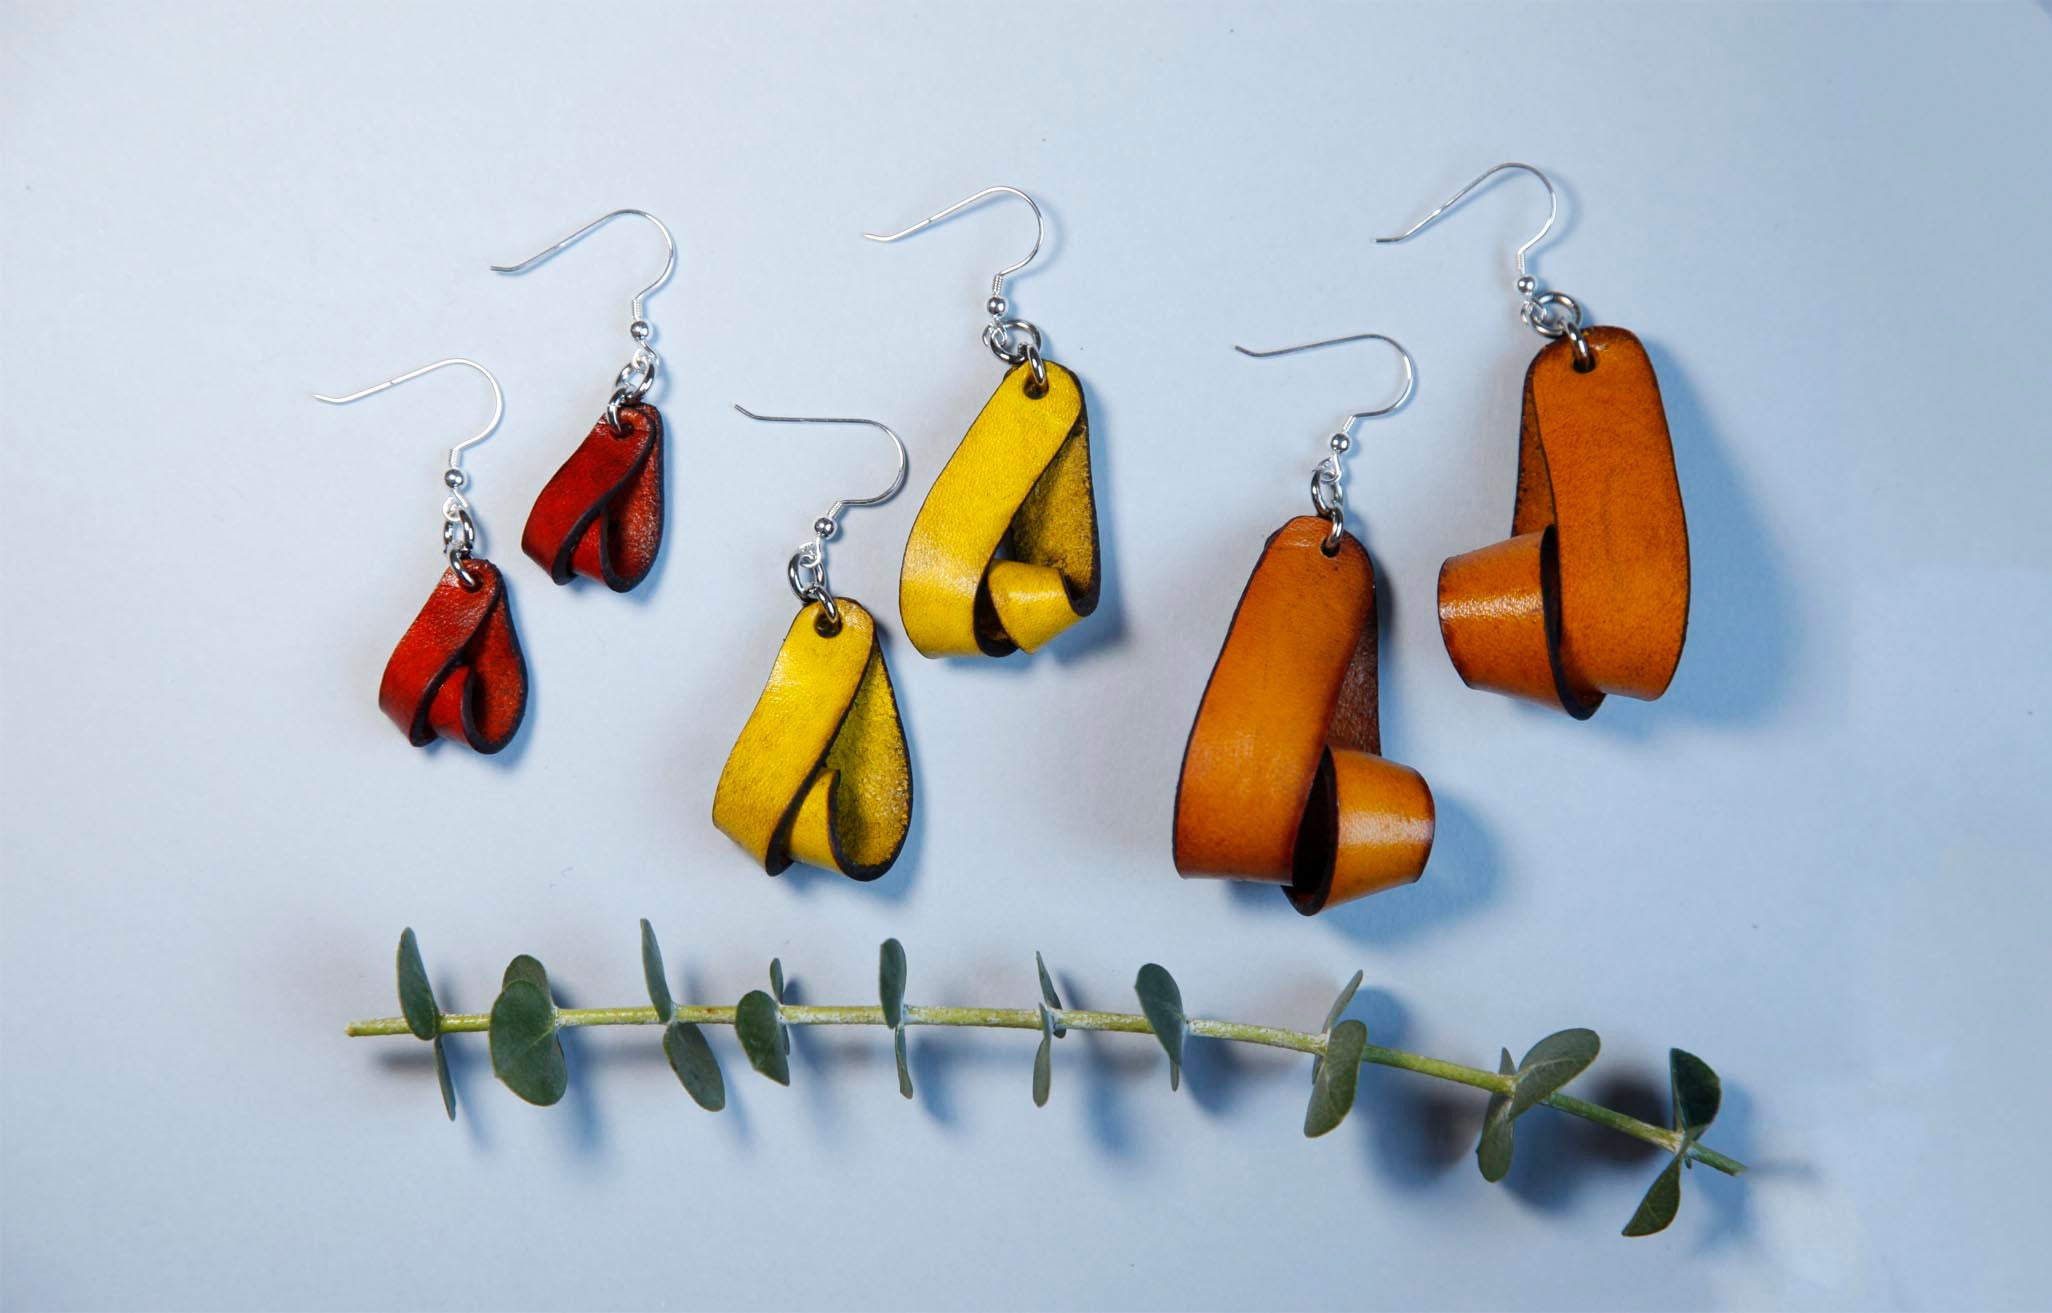 The Carla Small Leather Earrings - Yellow Ochre (Hand Dyed) - Amber Poitier Inc.